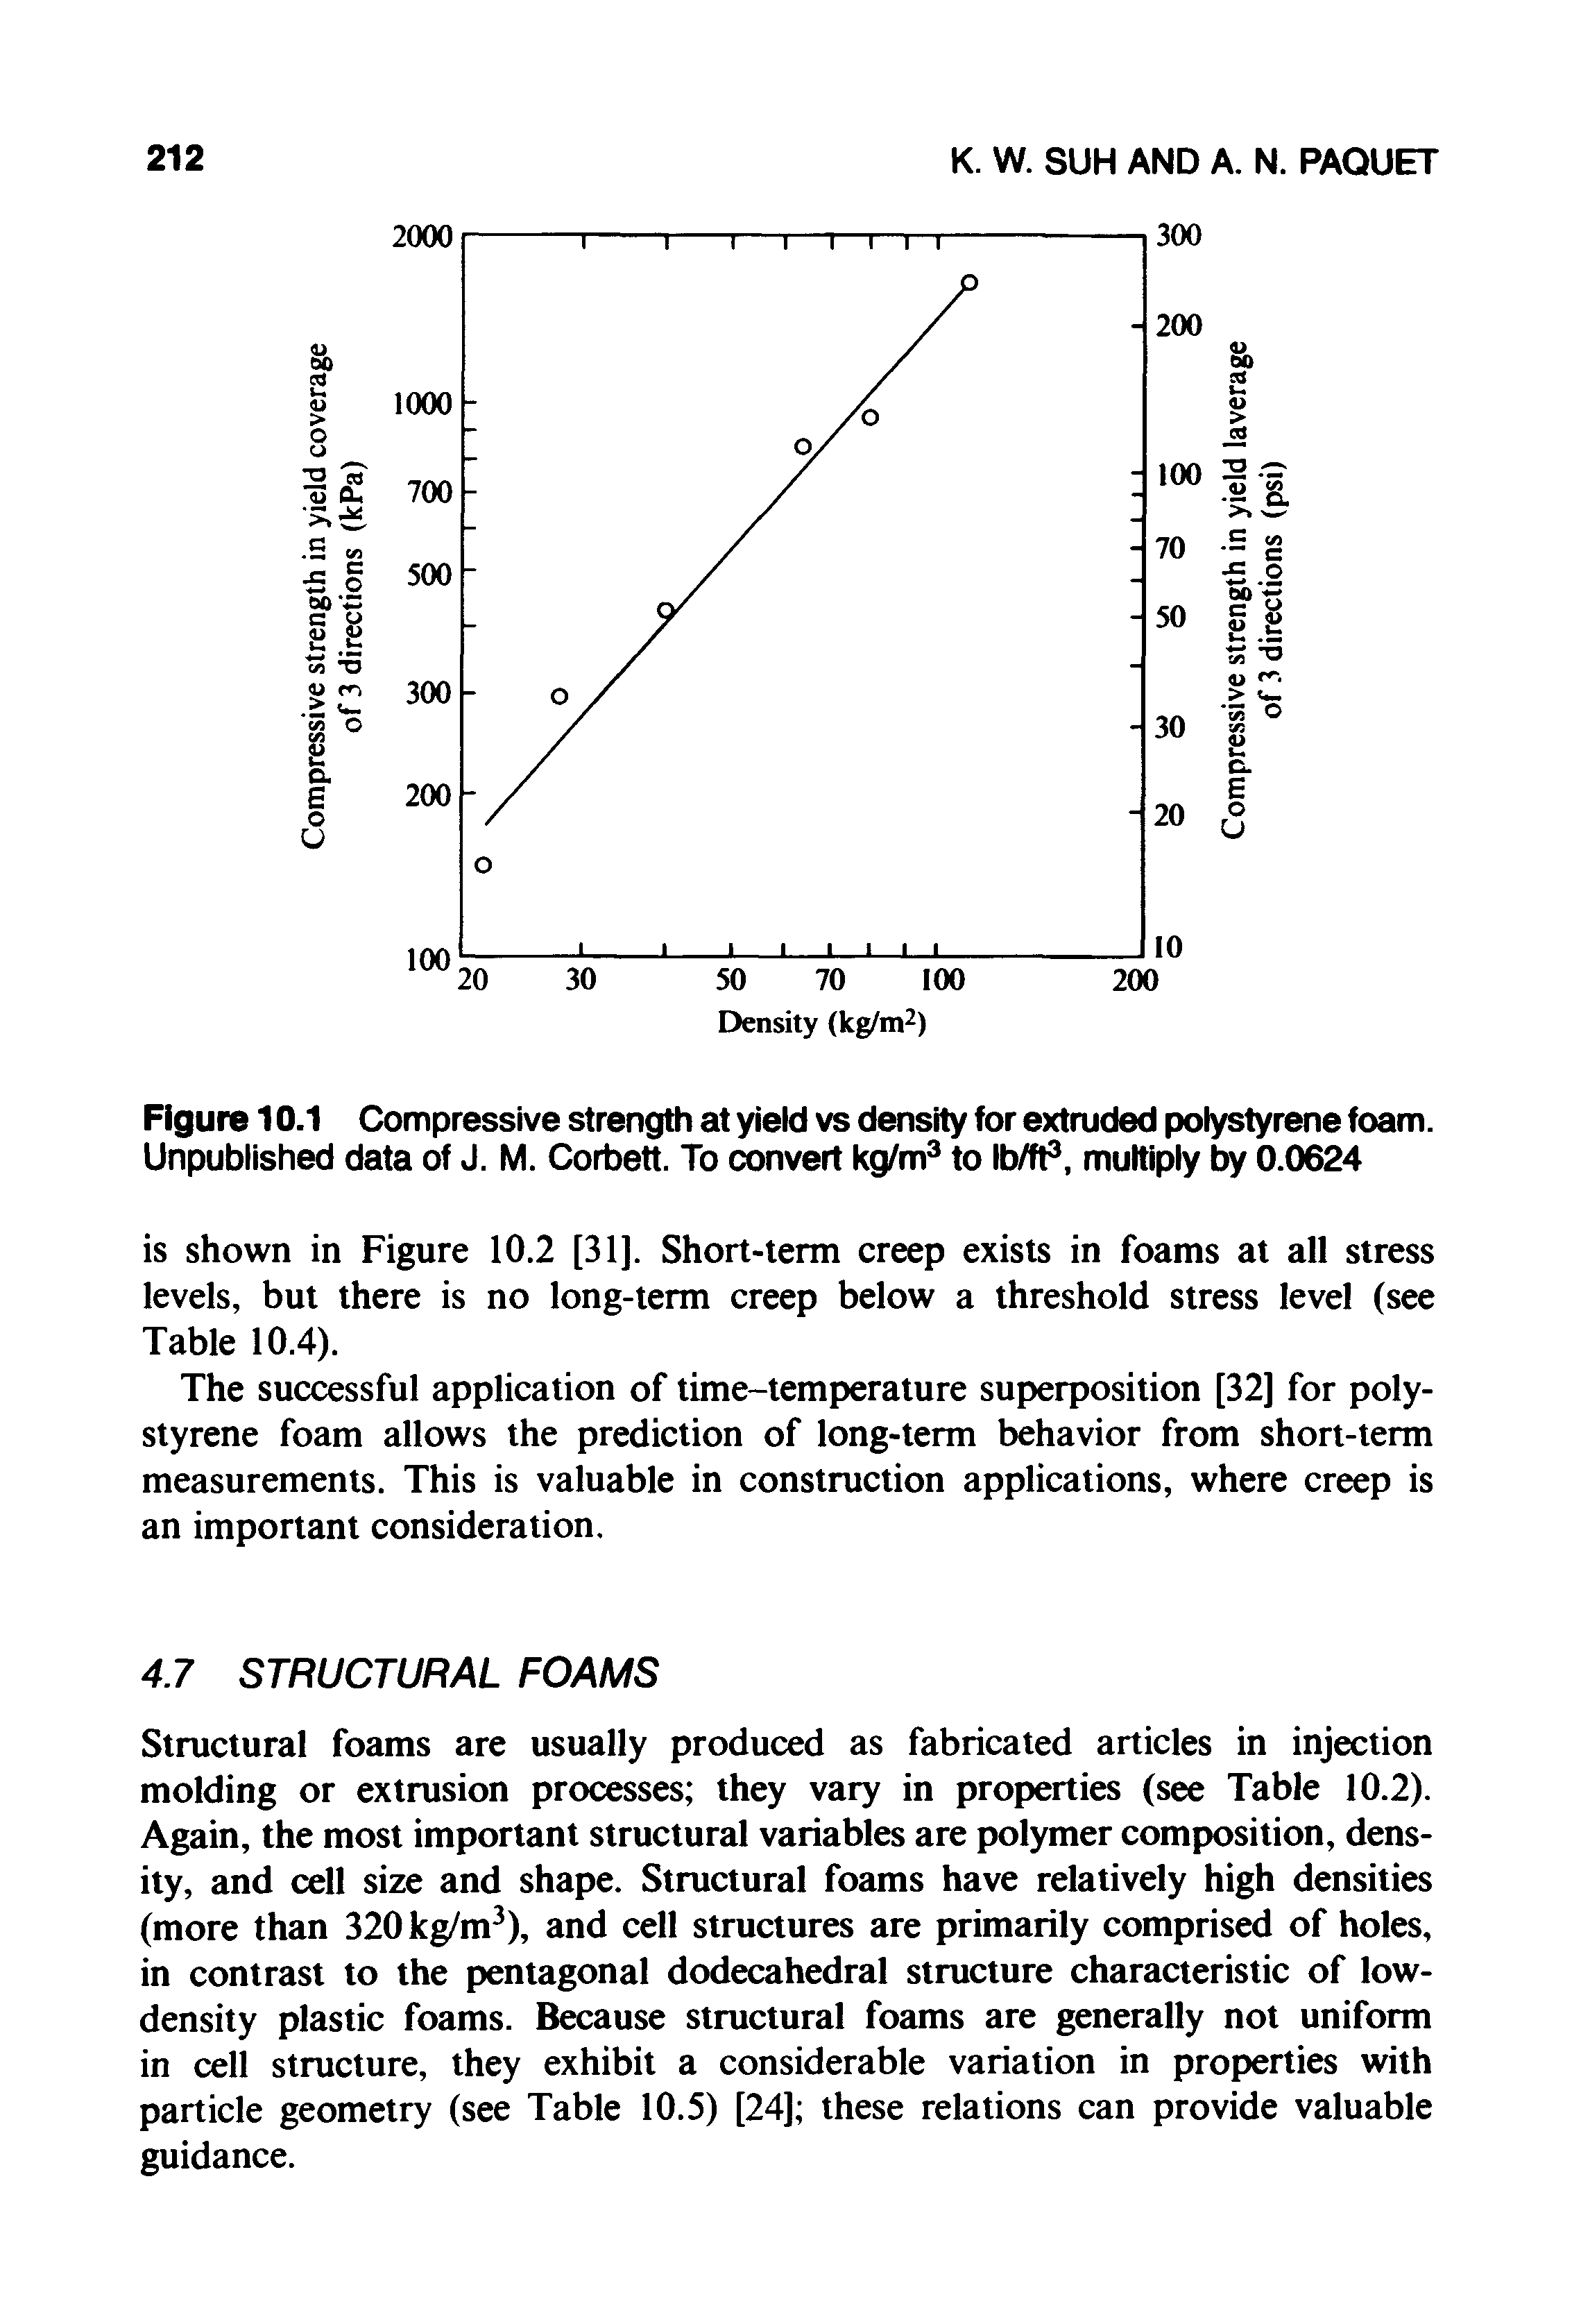 Figure 10.1 Compressive strength at yield vs density for extruded polystyrene foam. Unpublished data of J. M. Corbett. To convert kg/m3 to Ib/ft3, multiply by 0.0624...